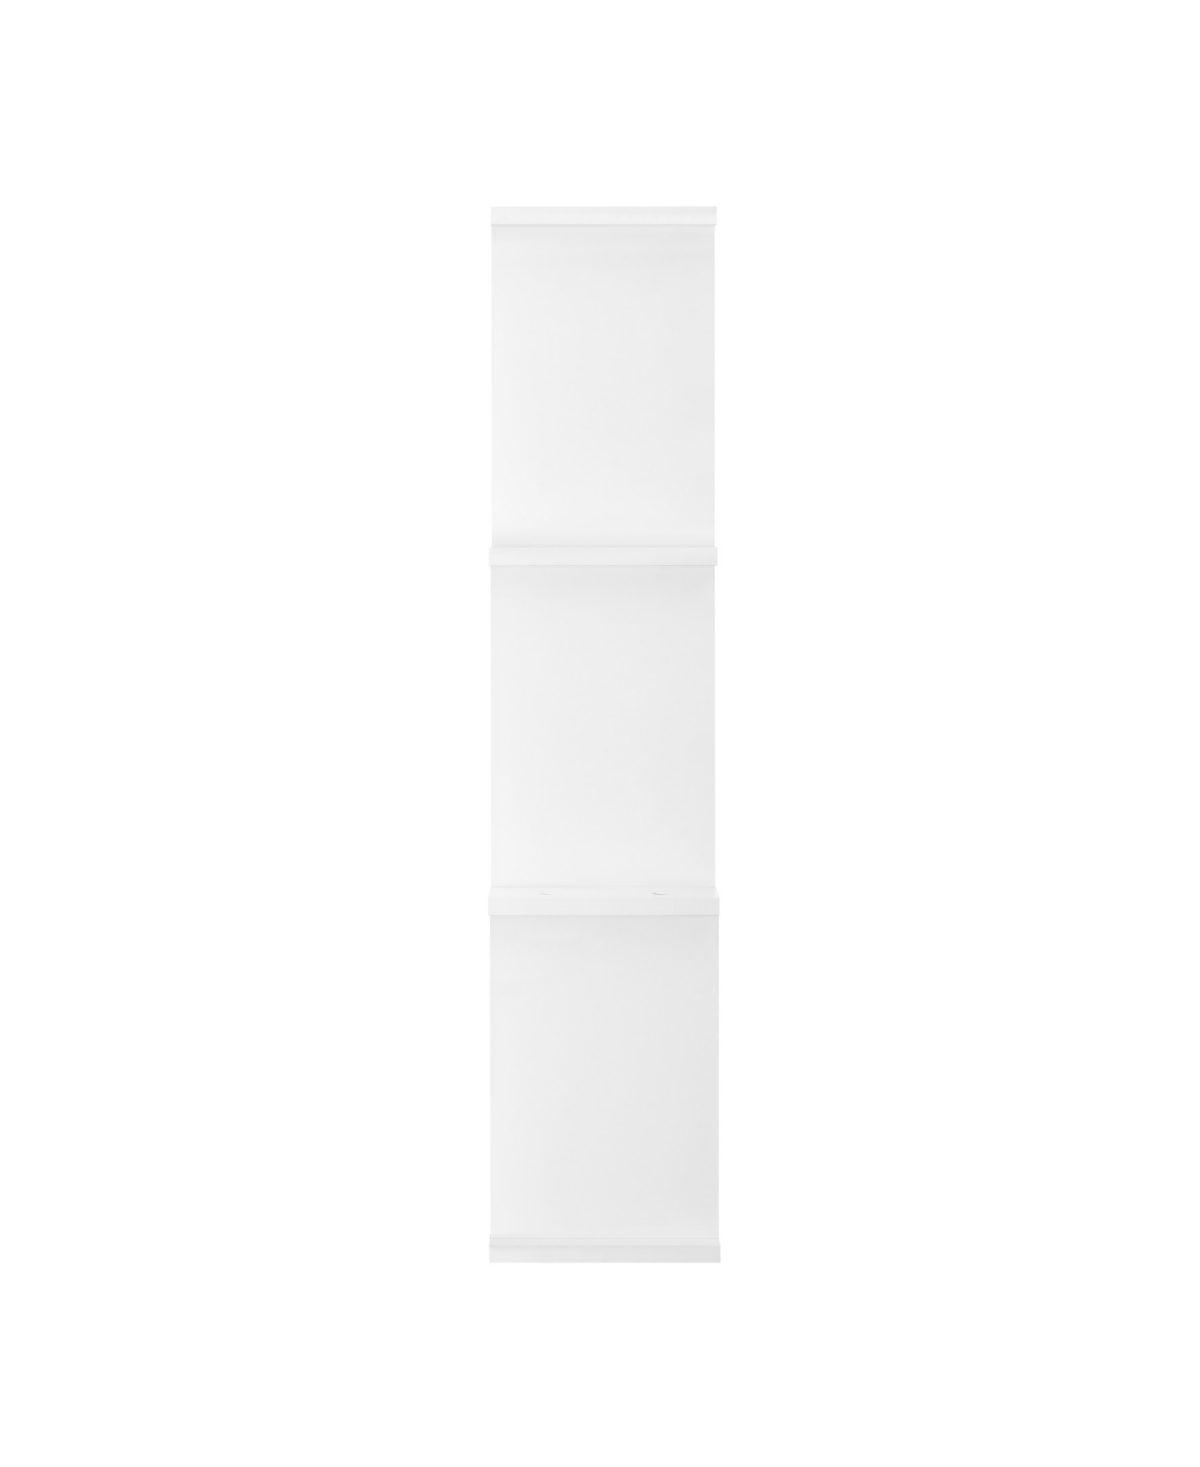 Shop Danya B 3-cube Floating Decorative Organizer Wall Shelf With Ledges, Horizontal Or Vertical Hanging Options In White